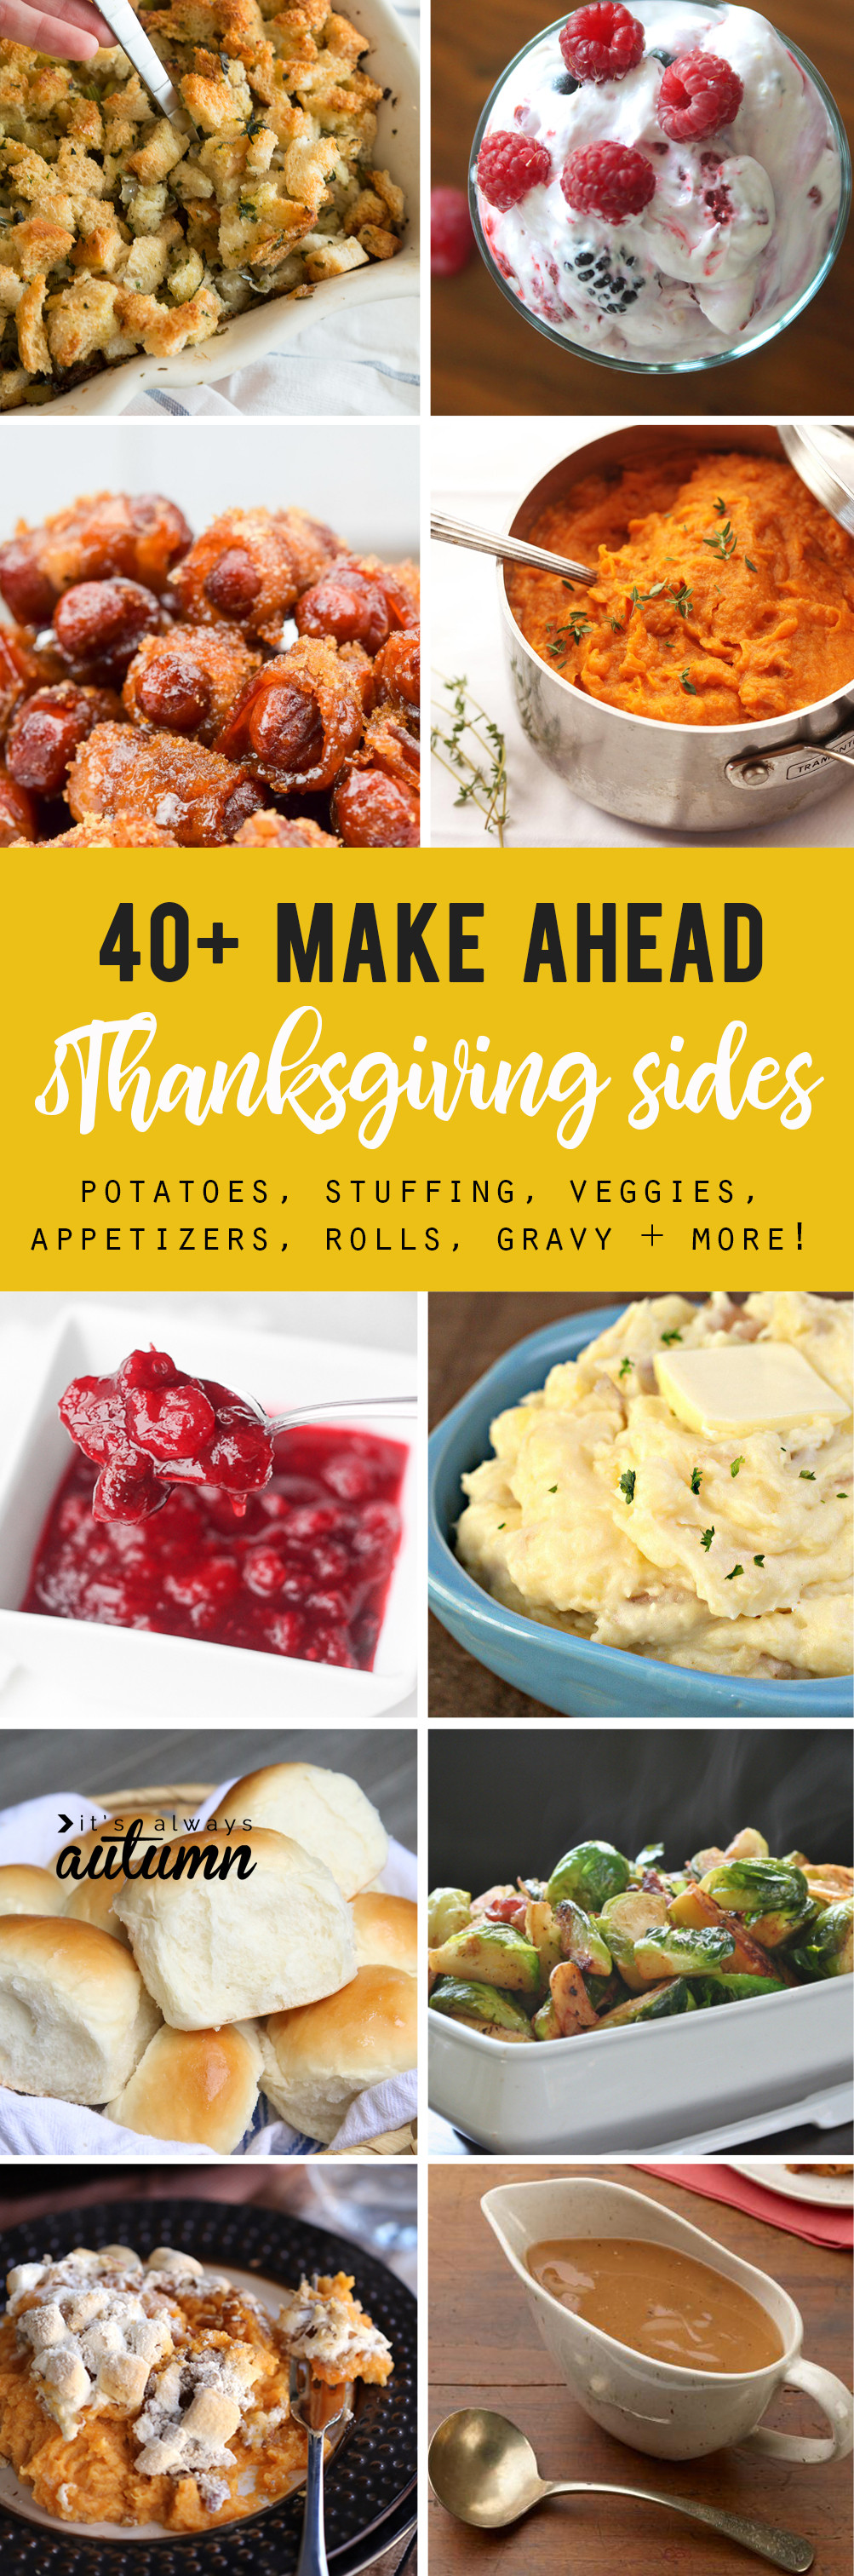 Make Ahead Thanksgiving Recipes
 the BEST LIST of Thanksgiving side dishes you can make